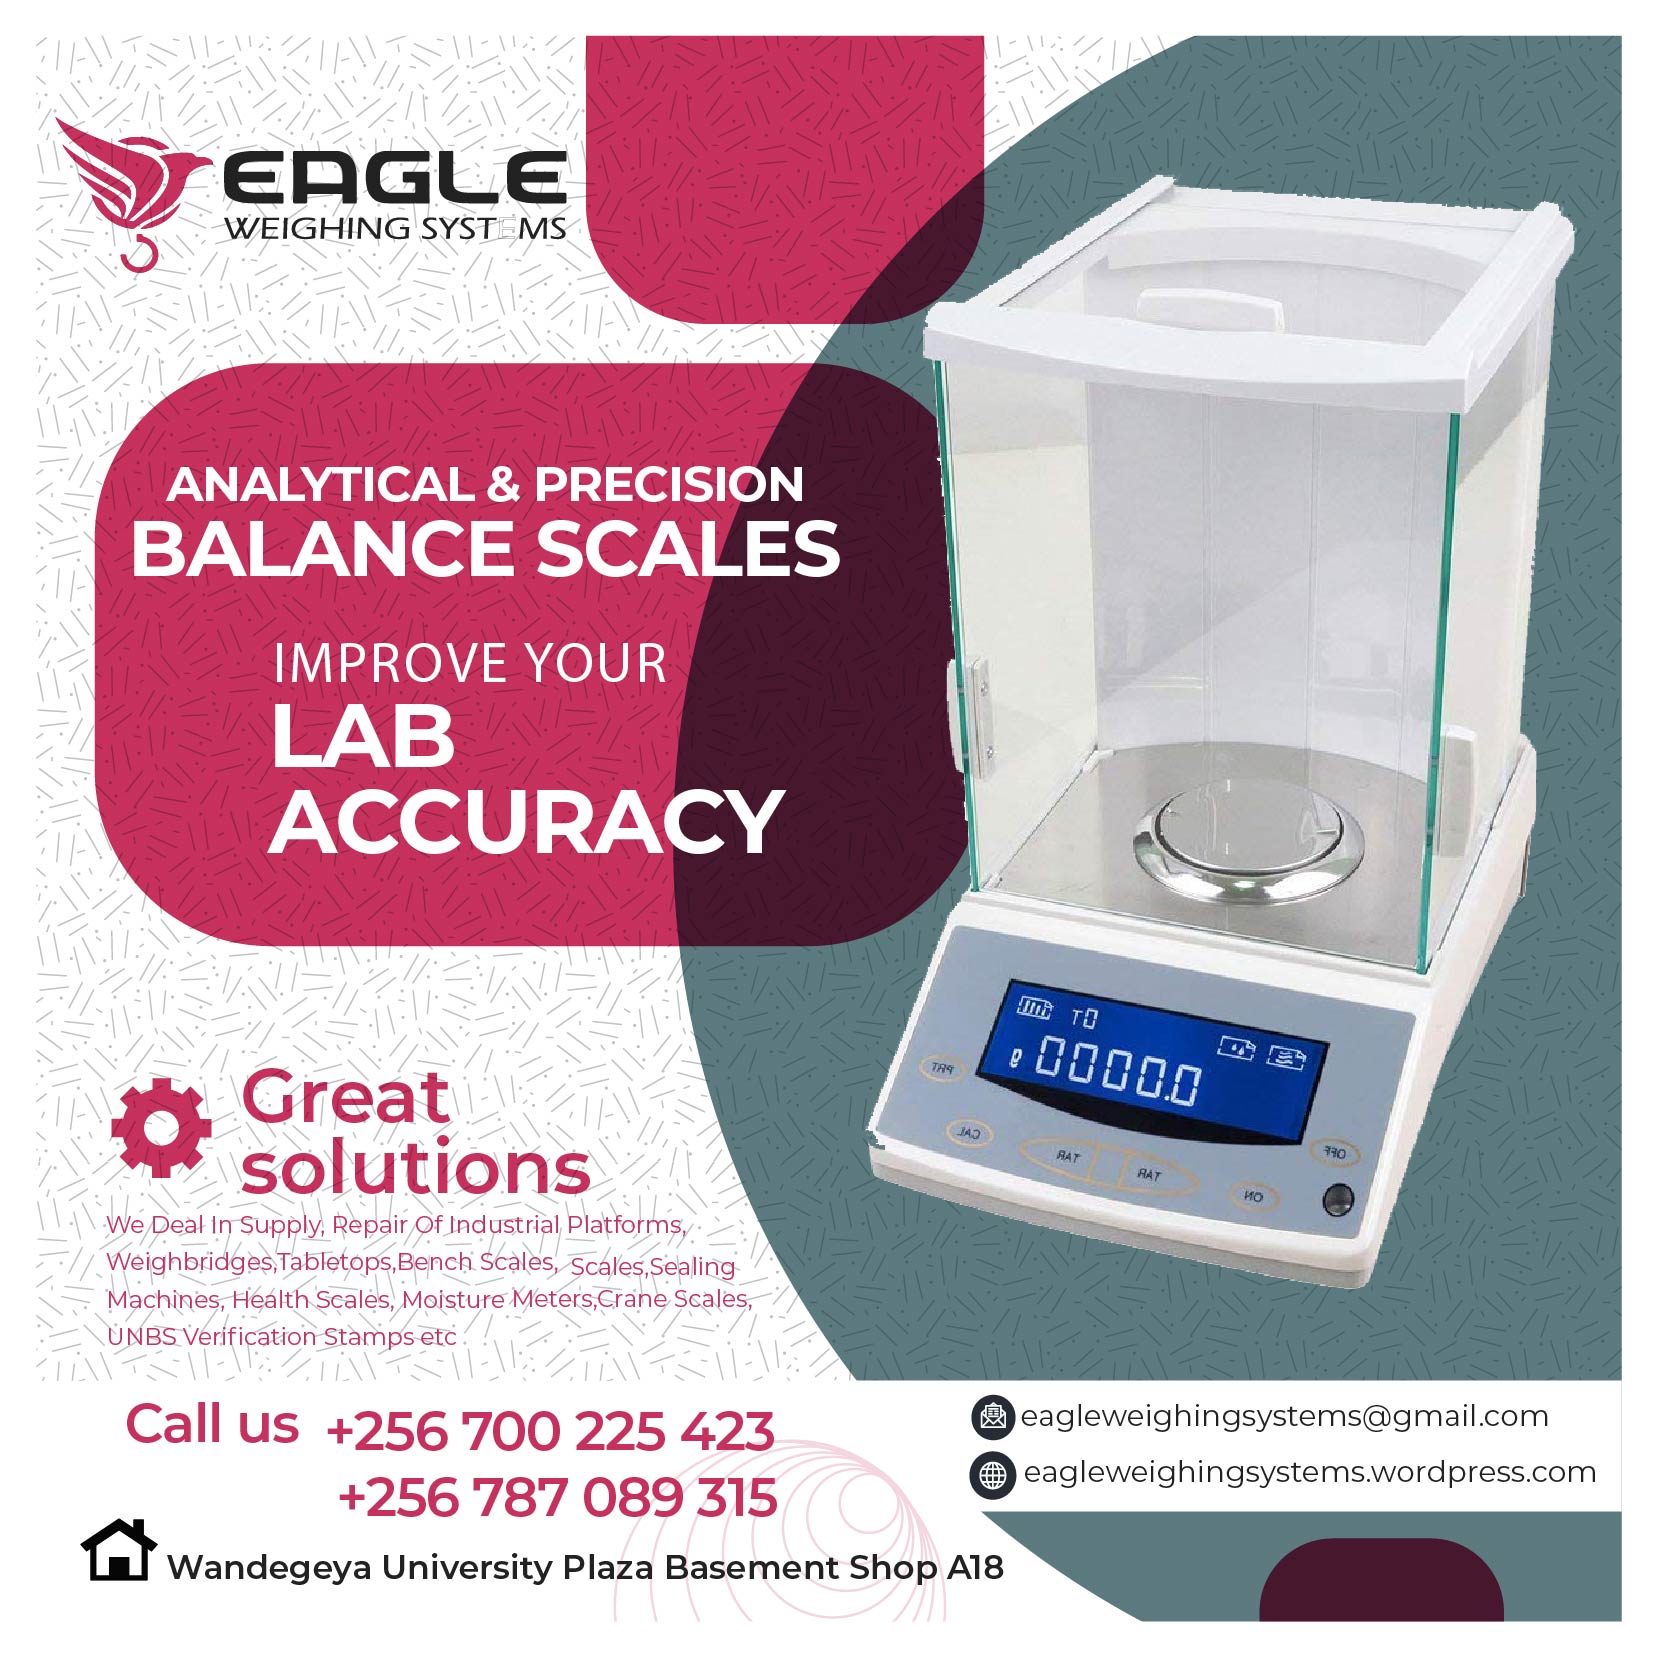 School laboratory weighing scale, Kampala Central Division, Central, Uganda